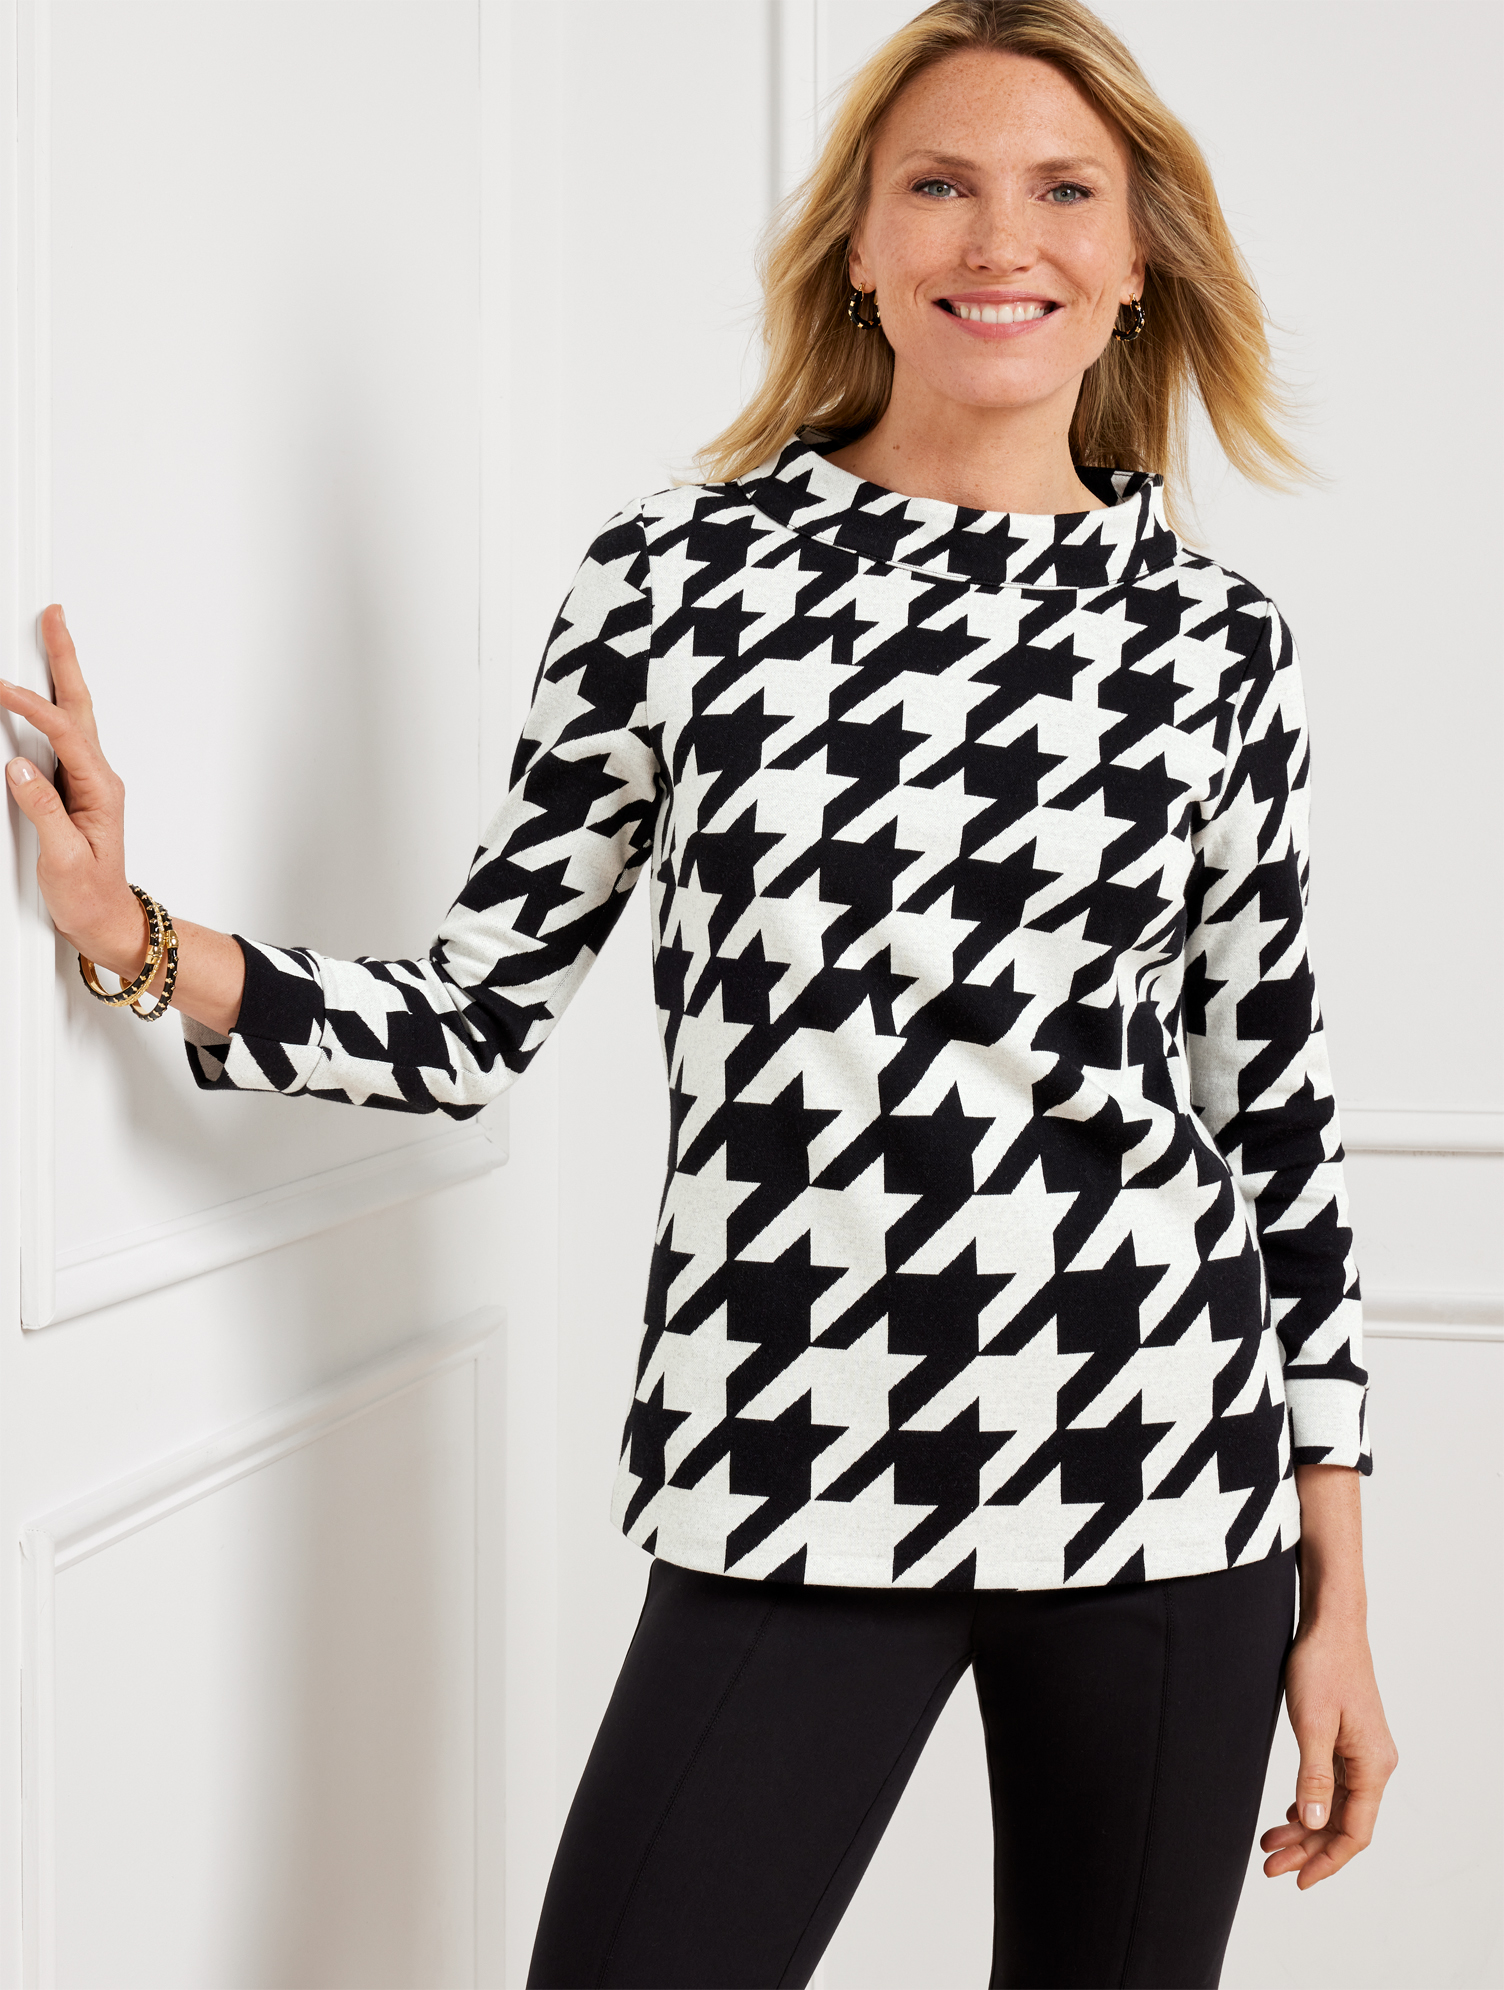 Talbots Plus Size - Houndstooth Jacquard Top - Black/ivory - 1x  In Black,ivory